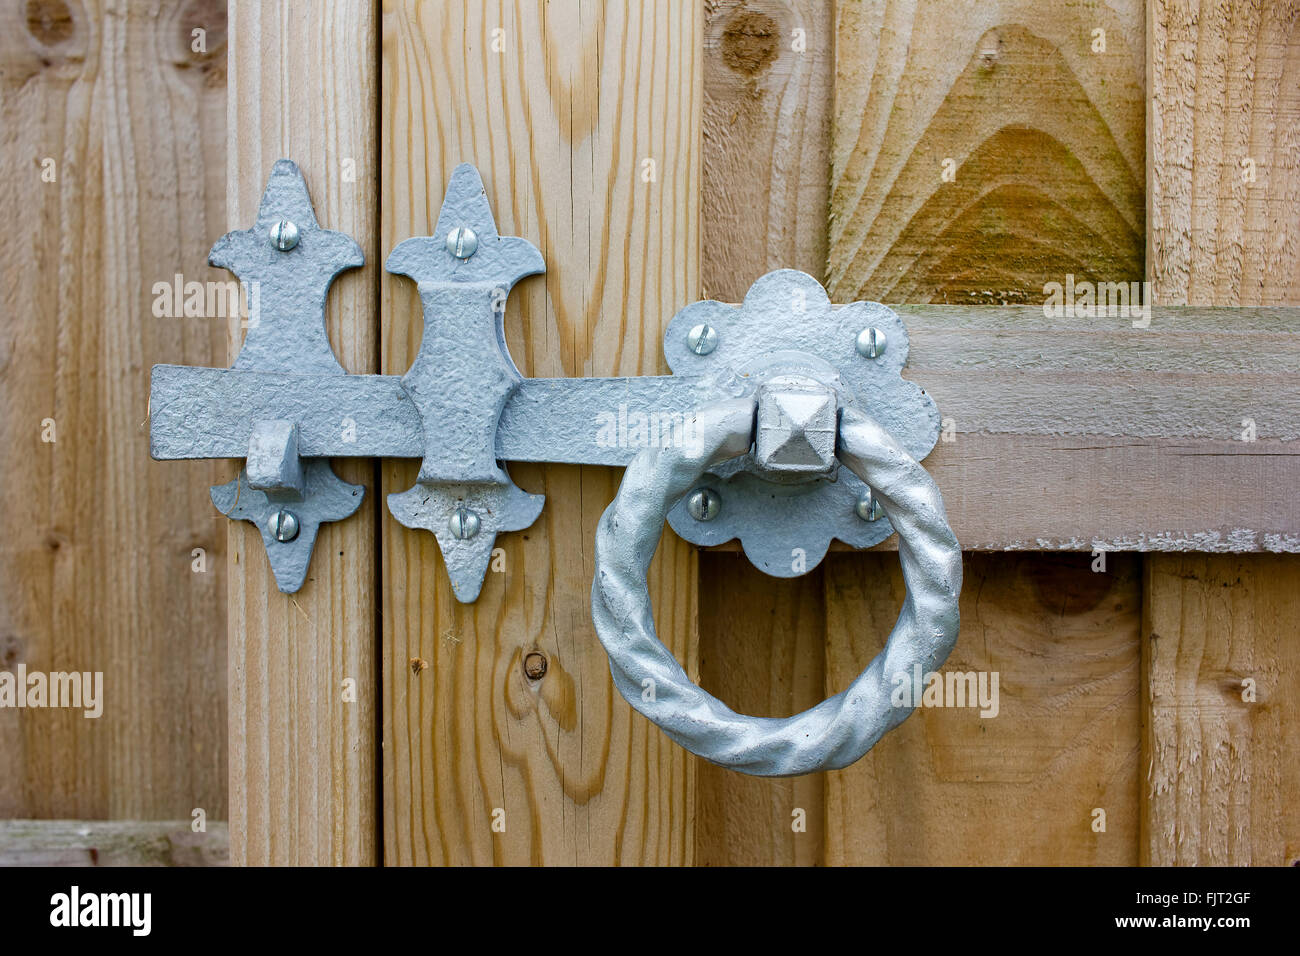 Metal Ring Latch For Garden Gate or other wood.  Round Twisted Metal Handle. Stock Photo